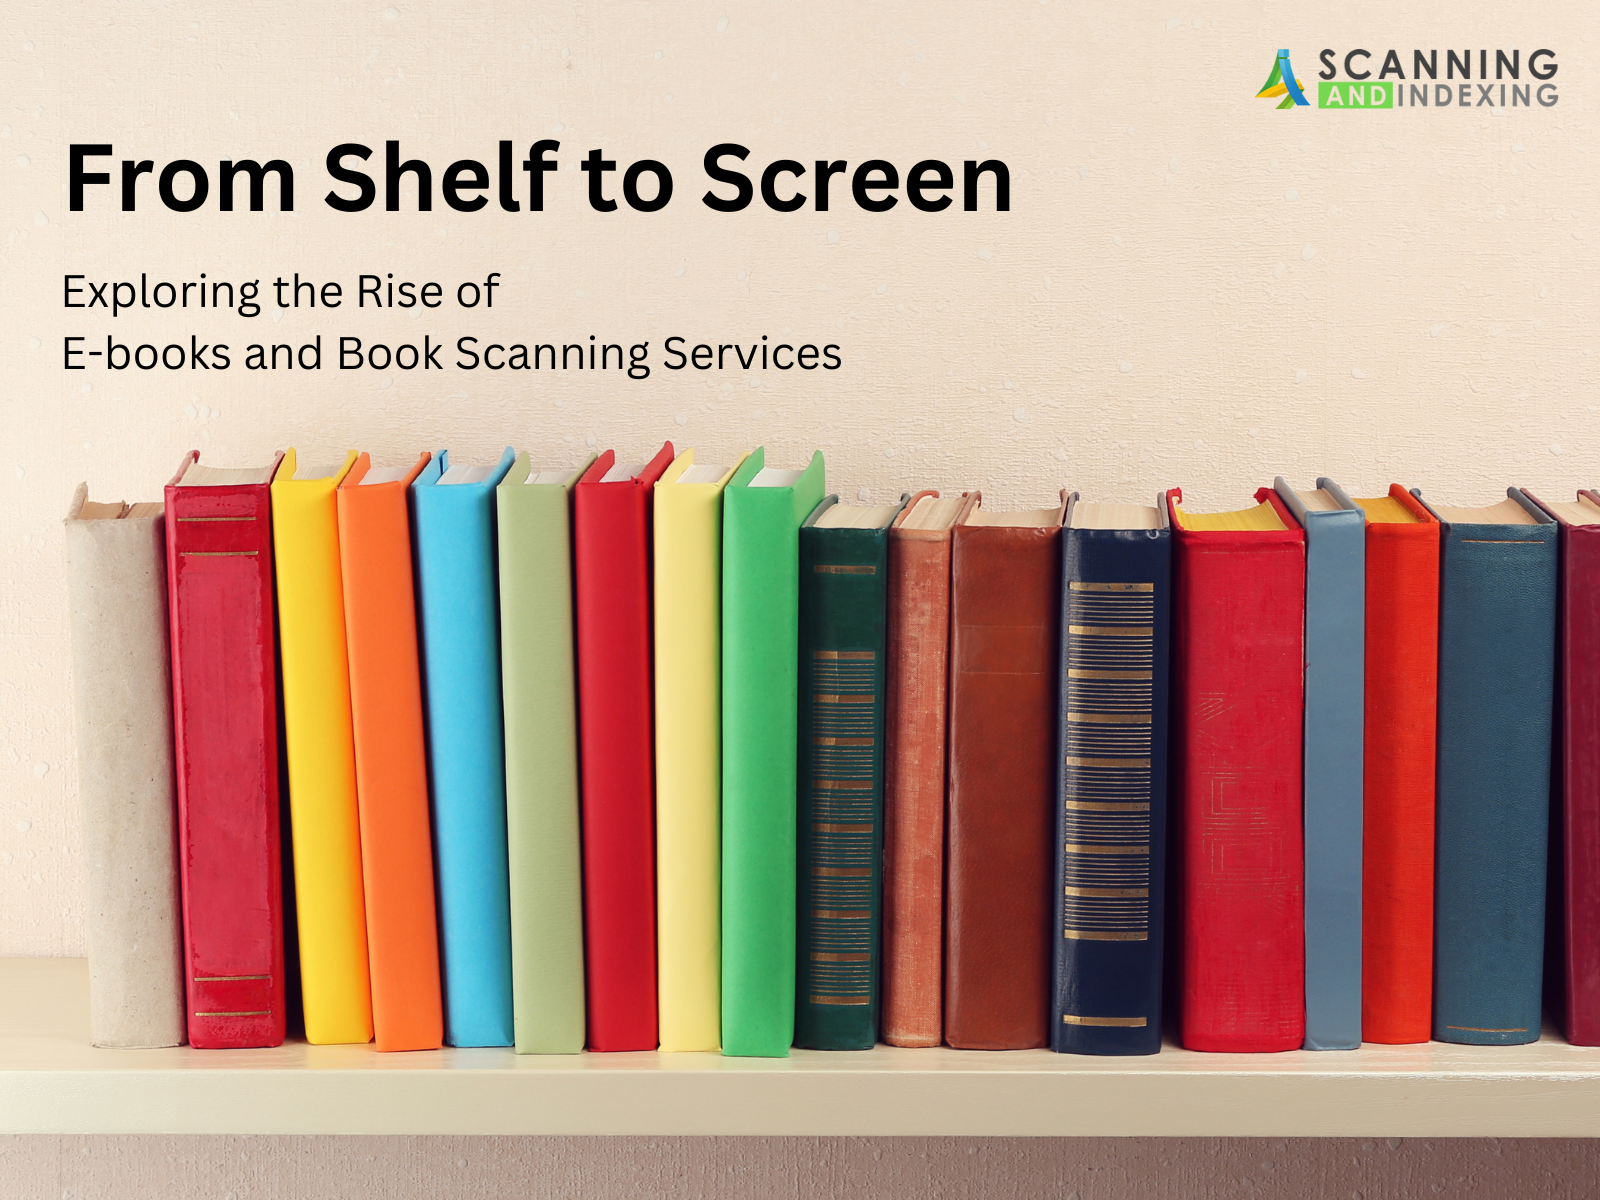 From Shelf to Screen: Exploring the Rise of E-books and Book Scanning Services